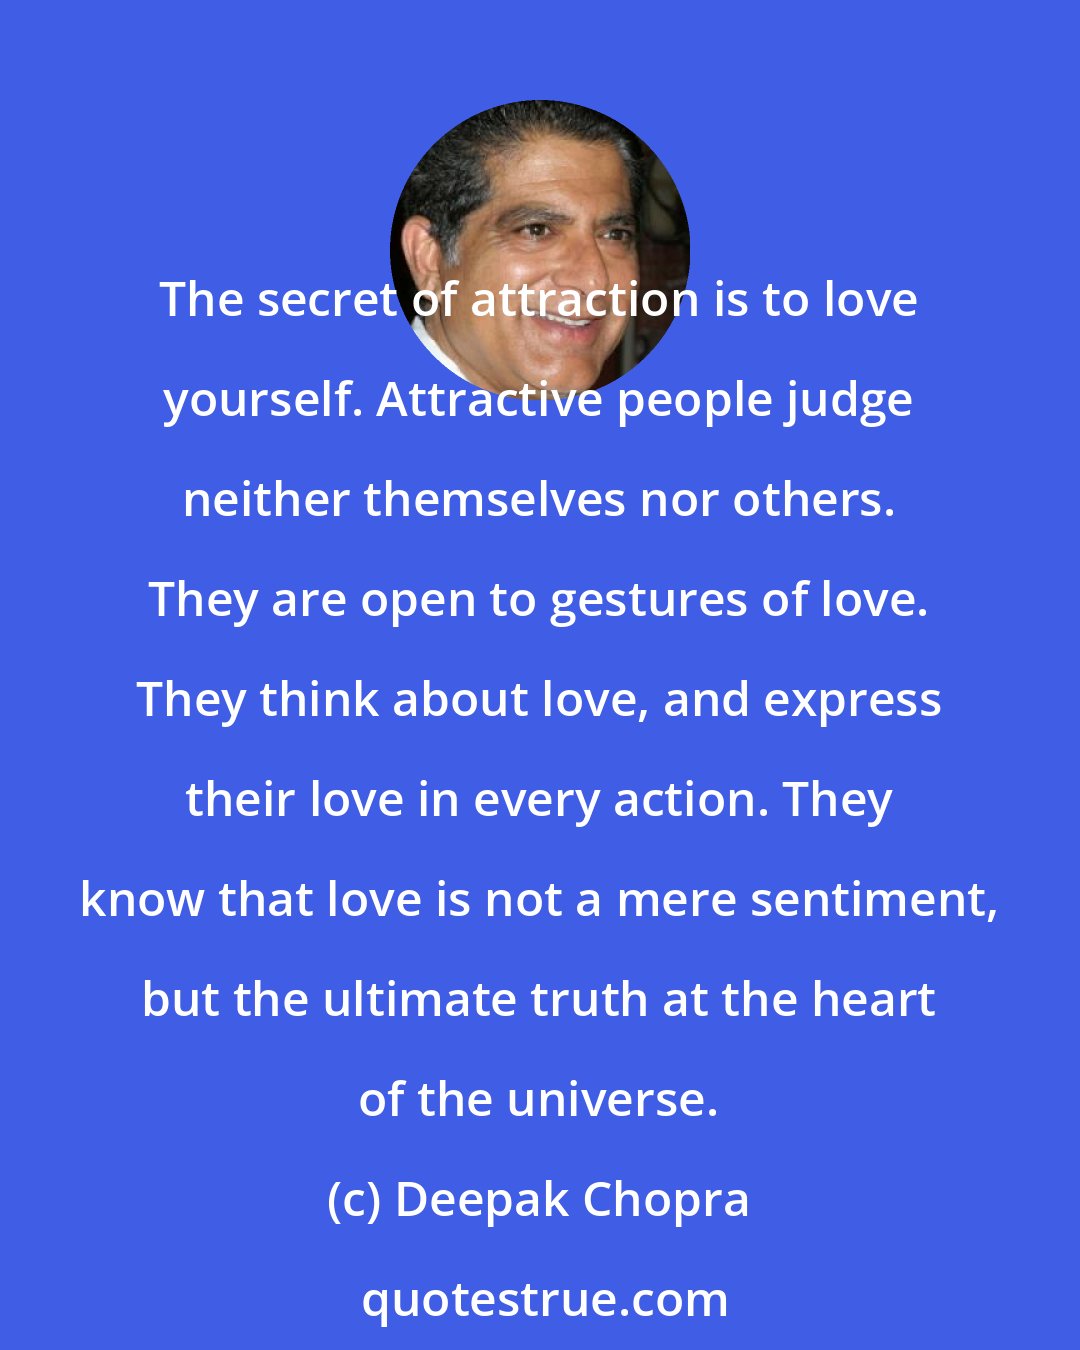 Deepak Chopra: The secret of attraction is to love yourself. Attractive people judge neither themselves nor others. They are open to gestures of love. They think about love, and express their love in every action. They know that love is not a mere sentiment, but the ultimate truth at the heart of the universe.